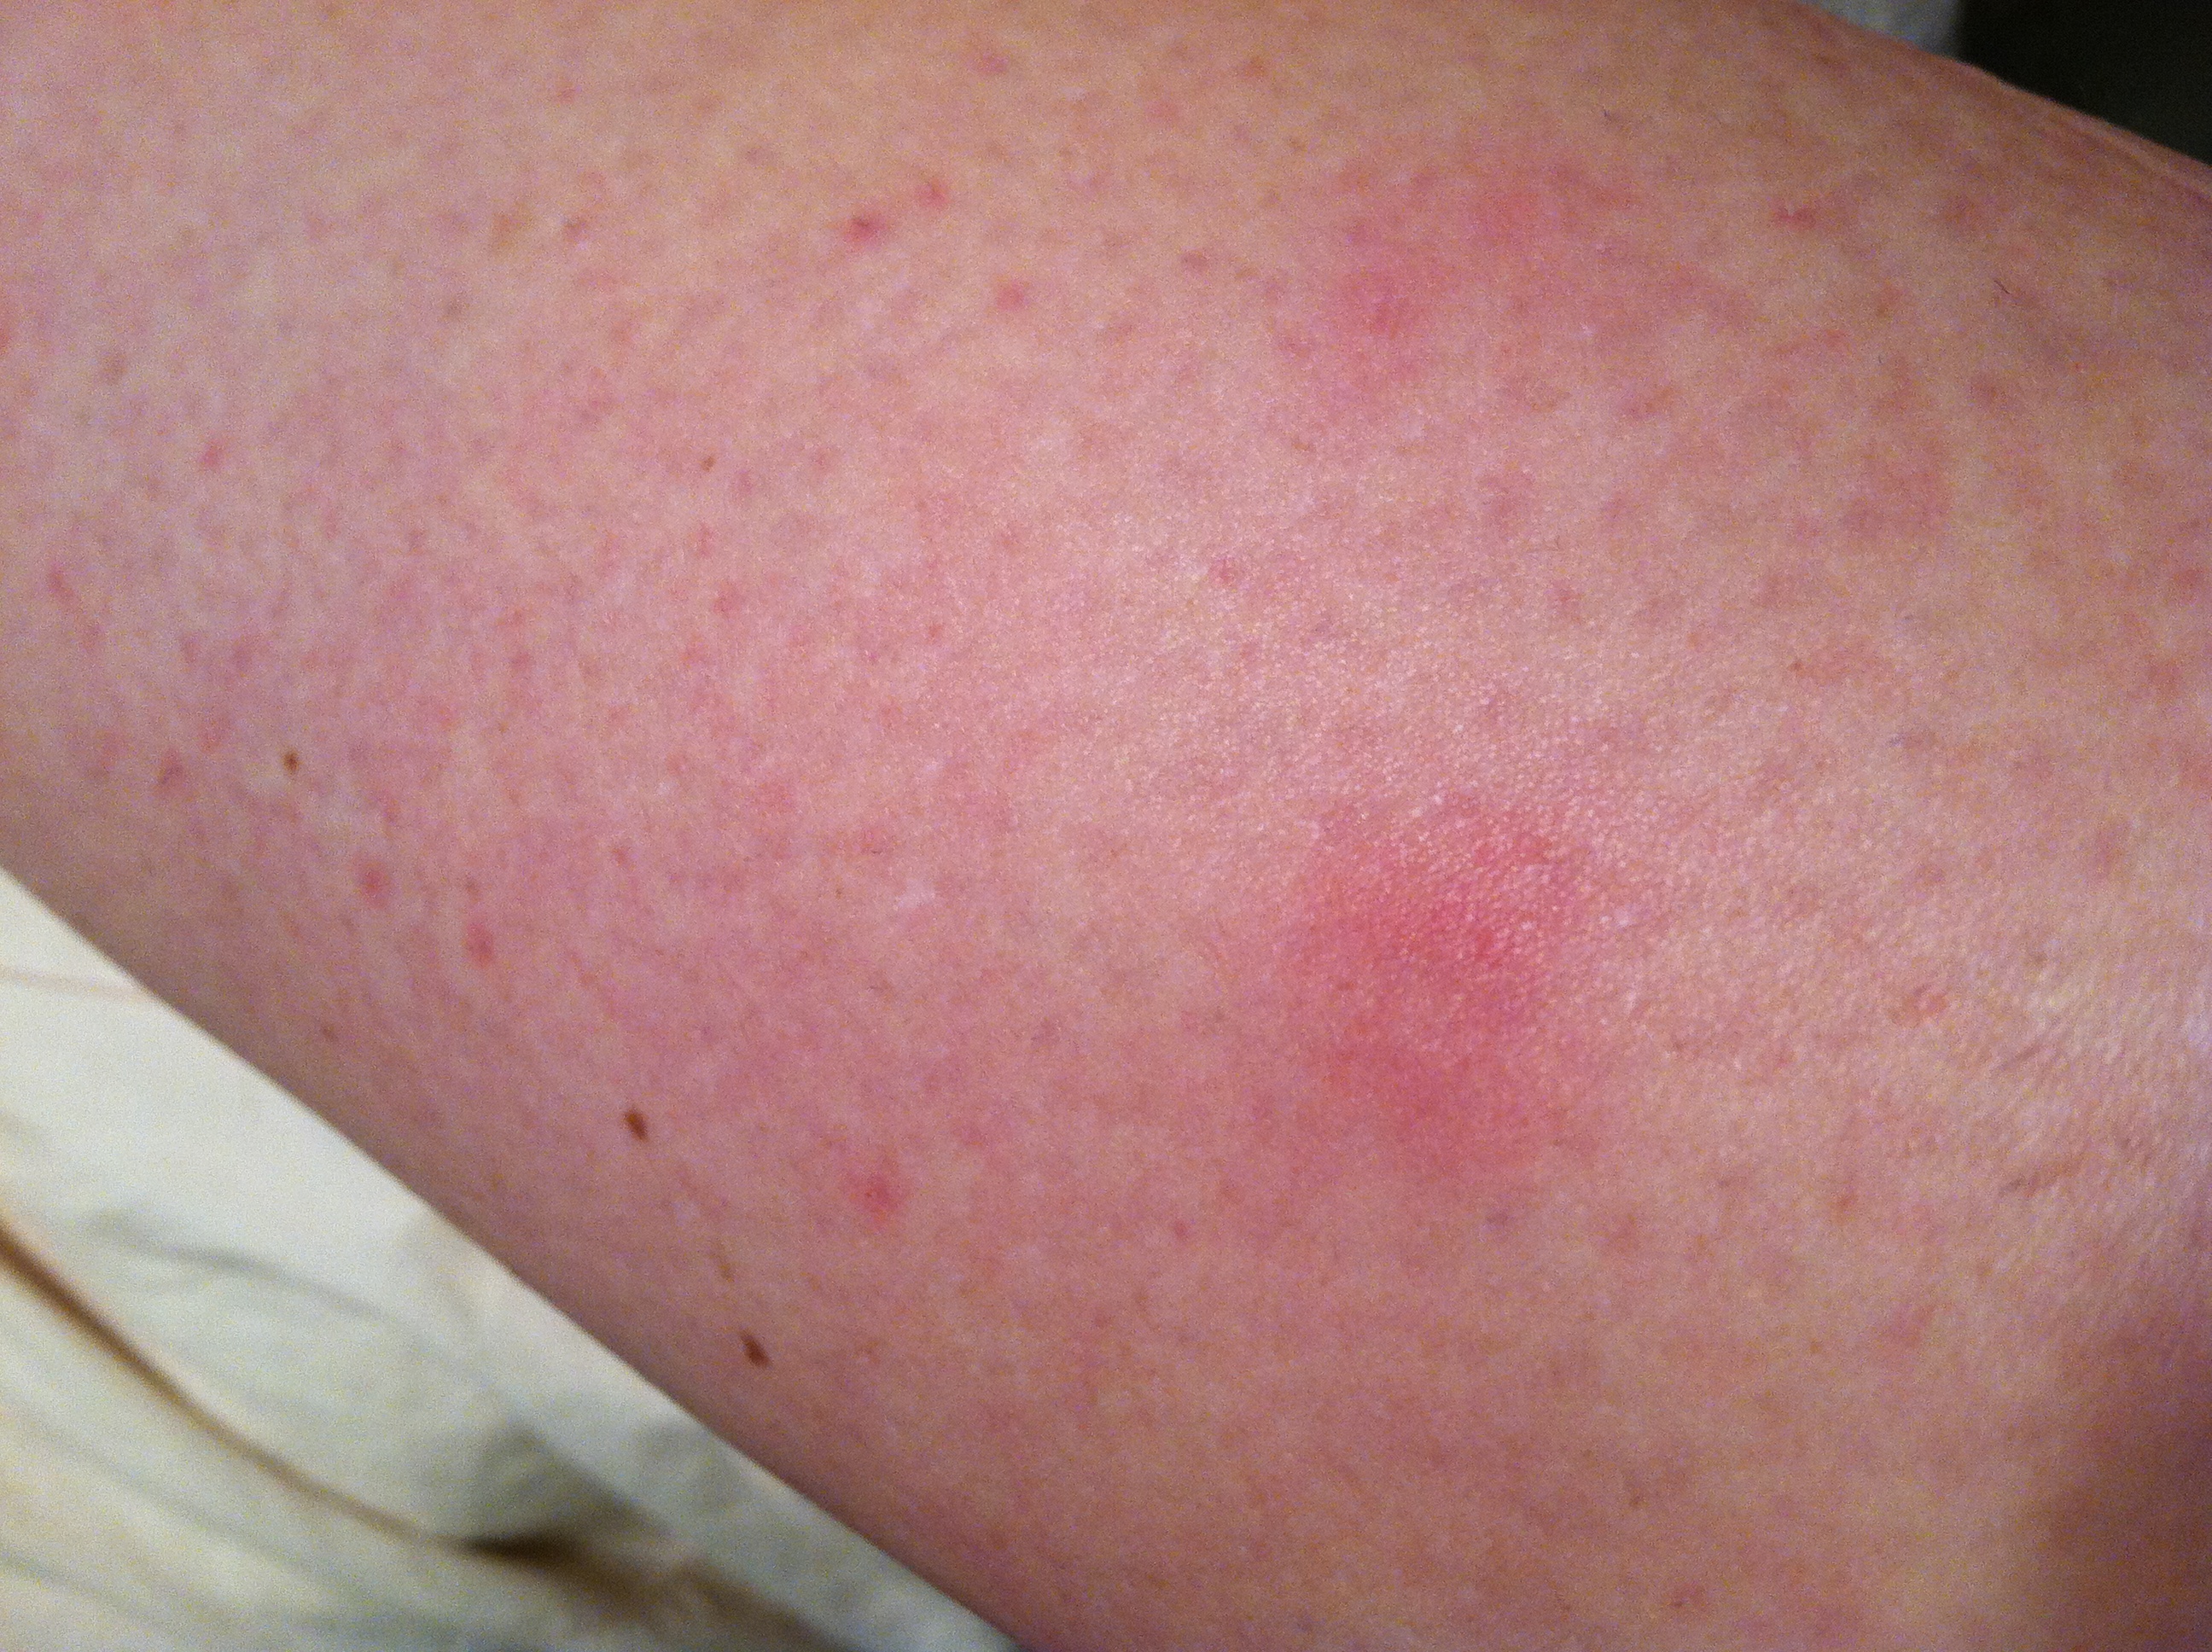 tiny pinpoint red dots on skin not itchy